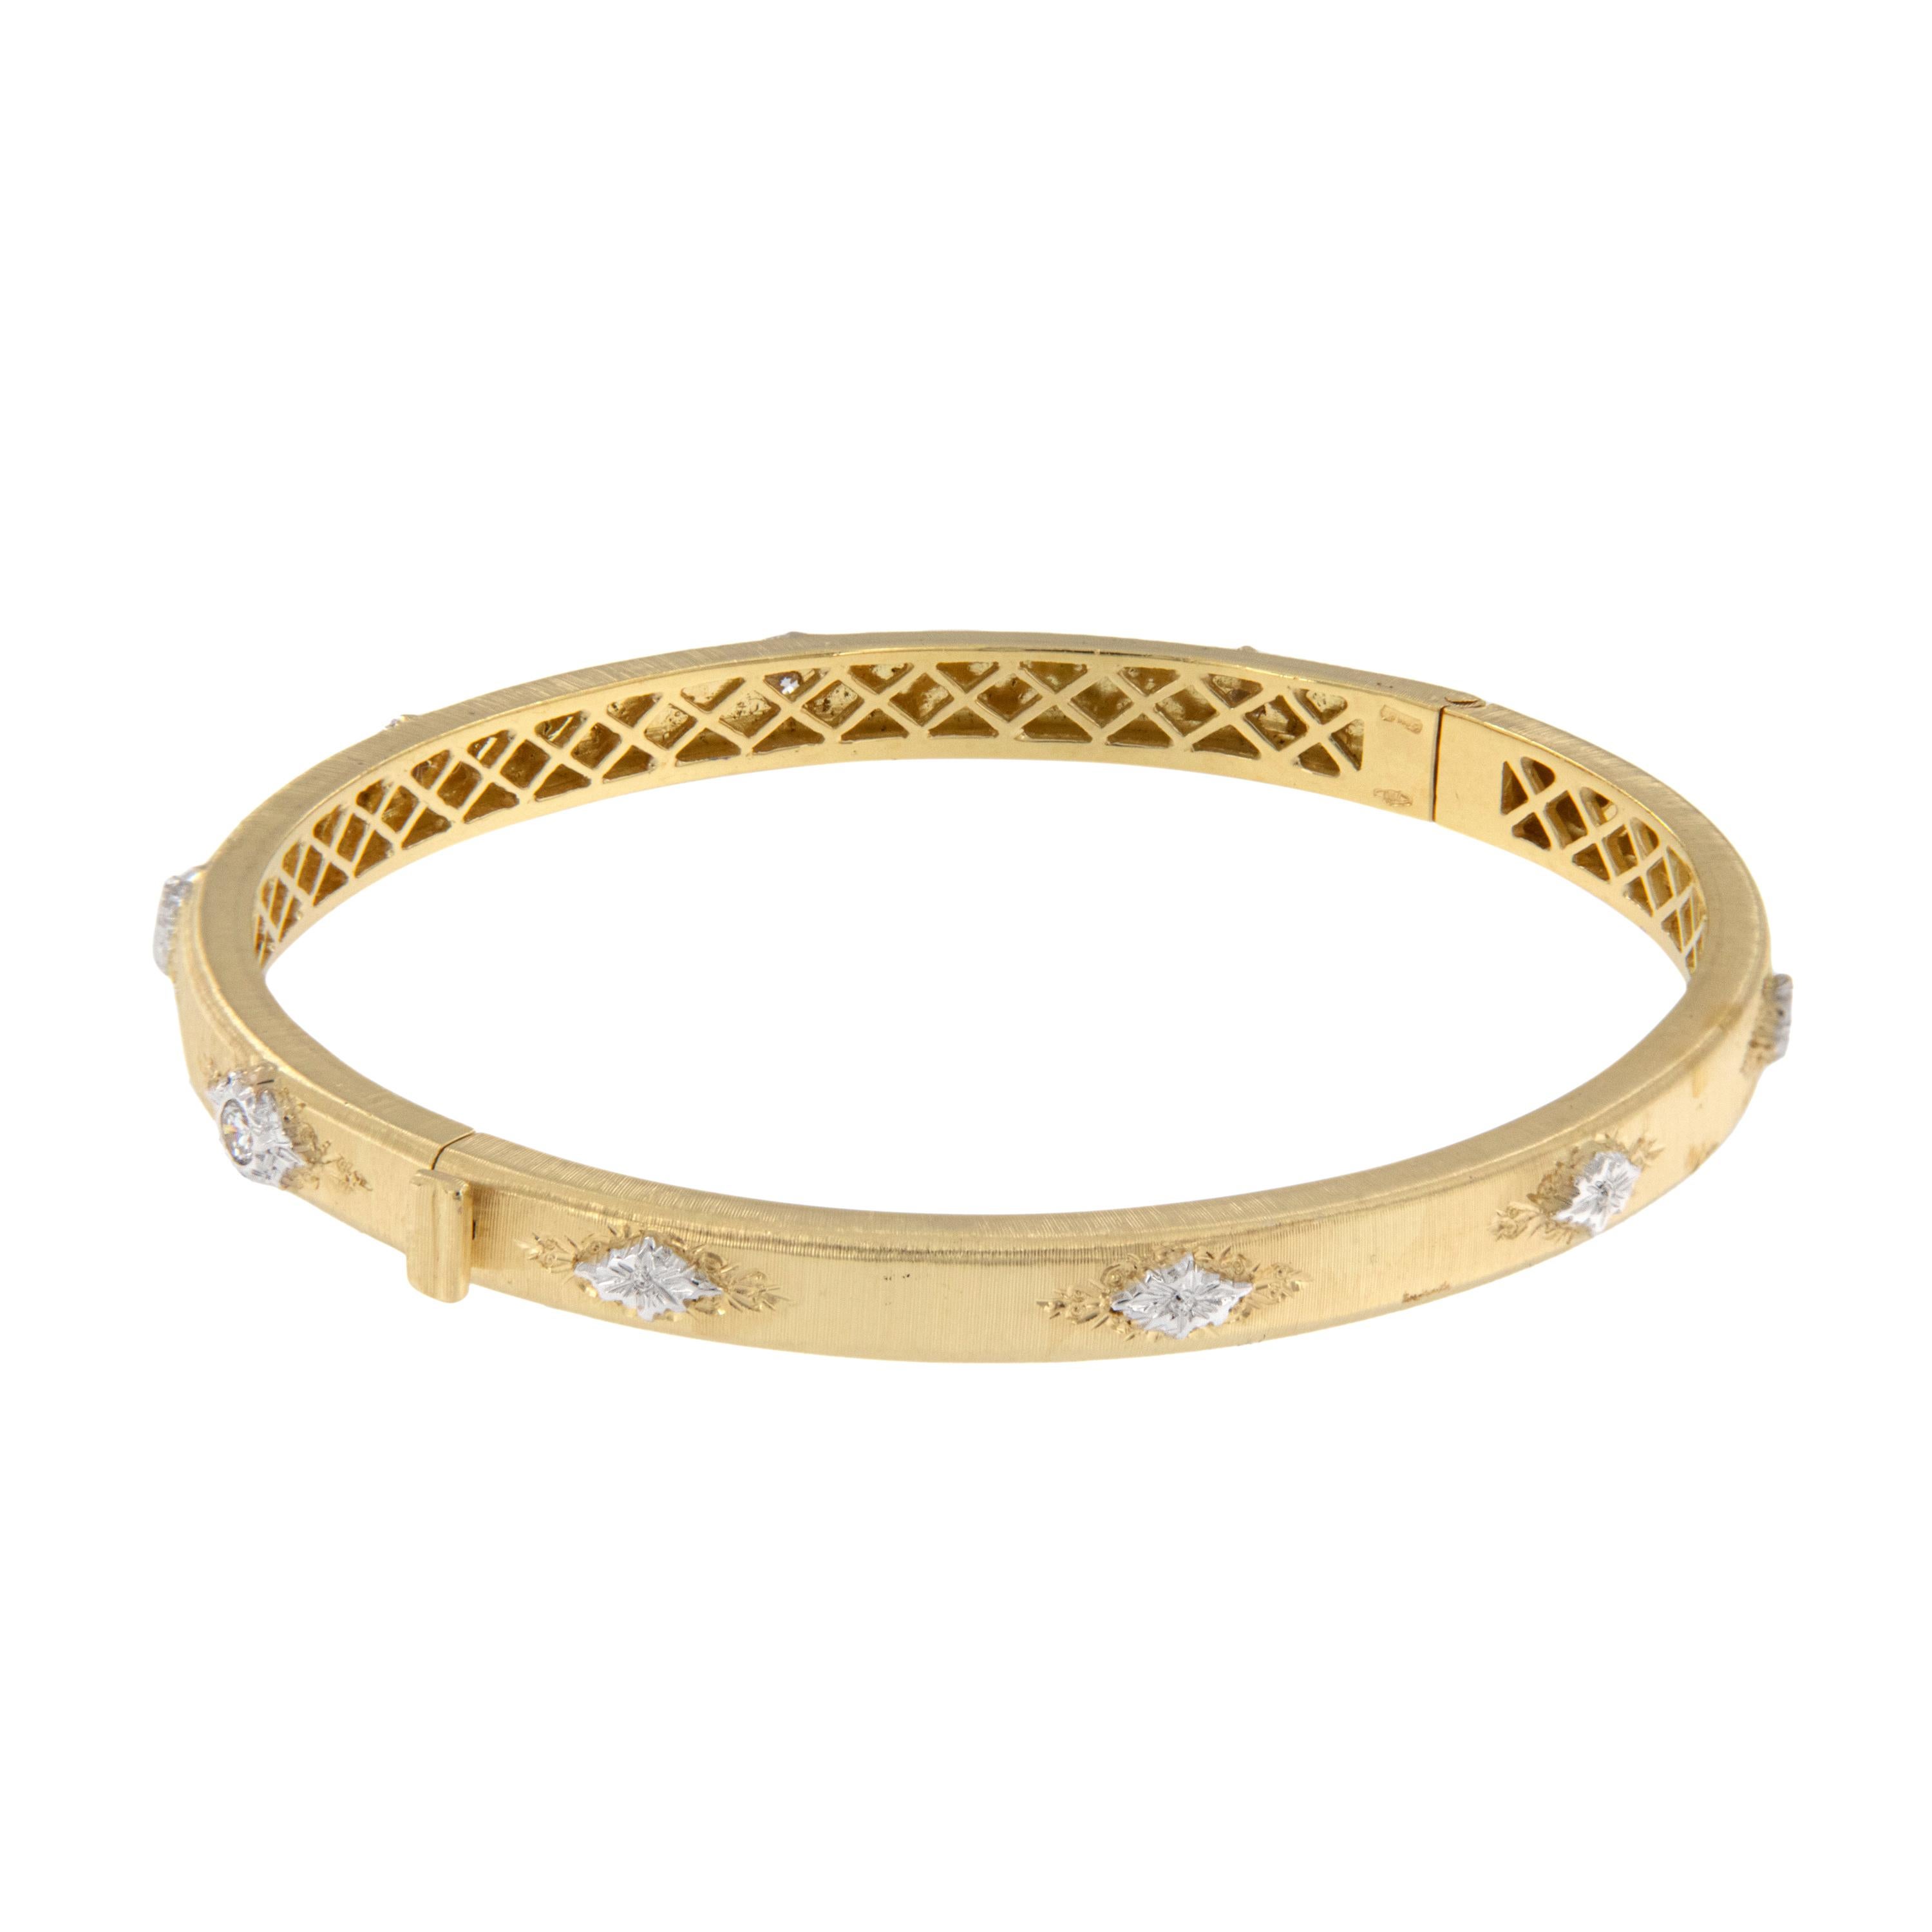 Nobody does it like the Italians! This 18 karat yellow gold bangle bracelet was made in Italy and is accented with 6 RBC diamonds = 0.35 Cttw in white gold bezels further detailed with signature Florentine finish. 7 3/16